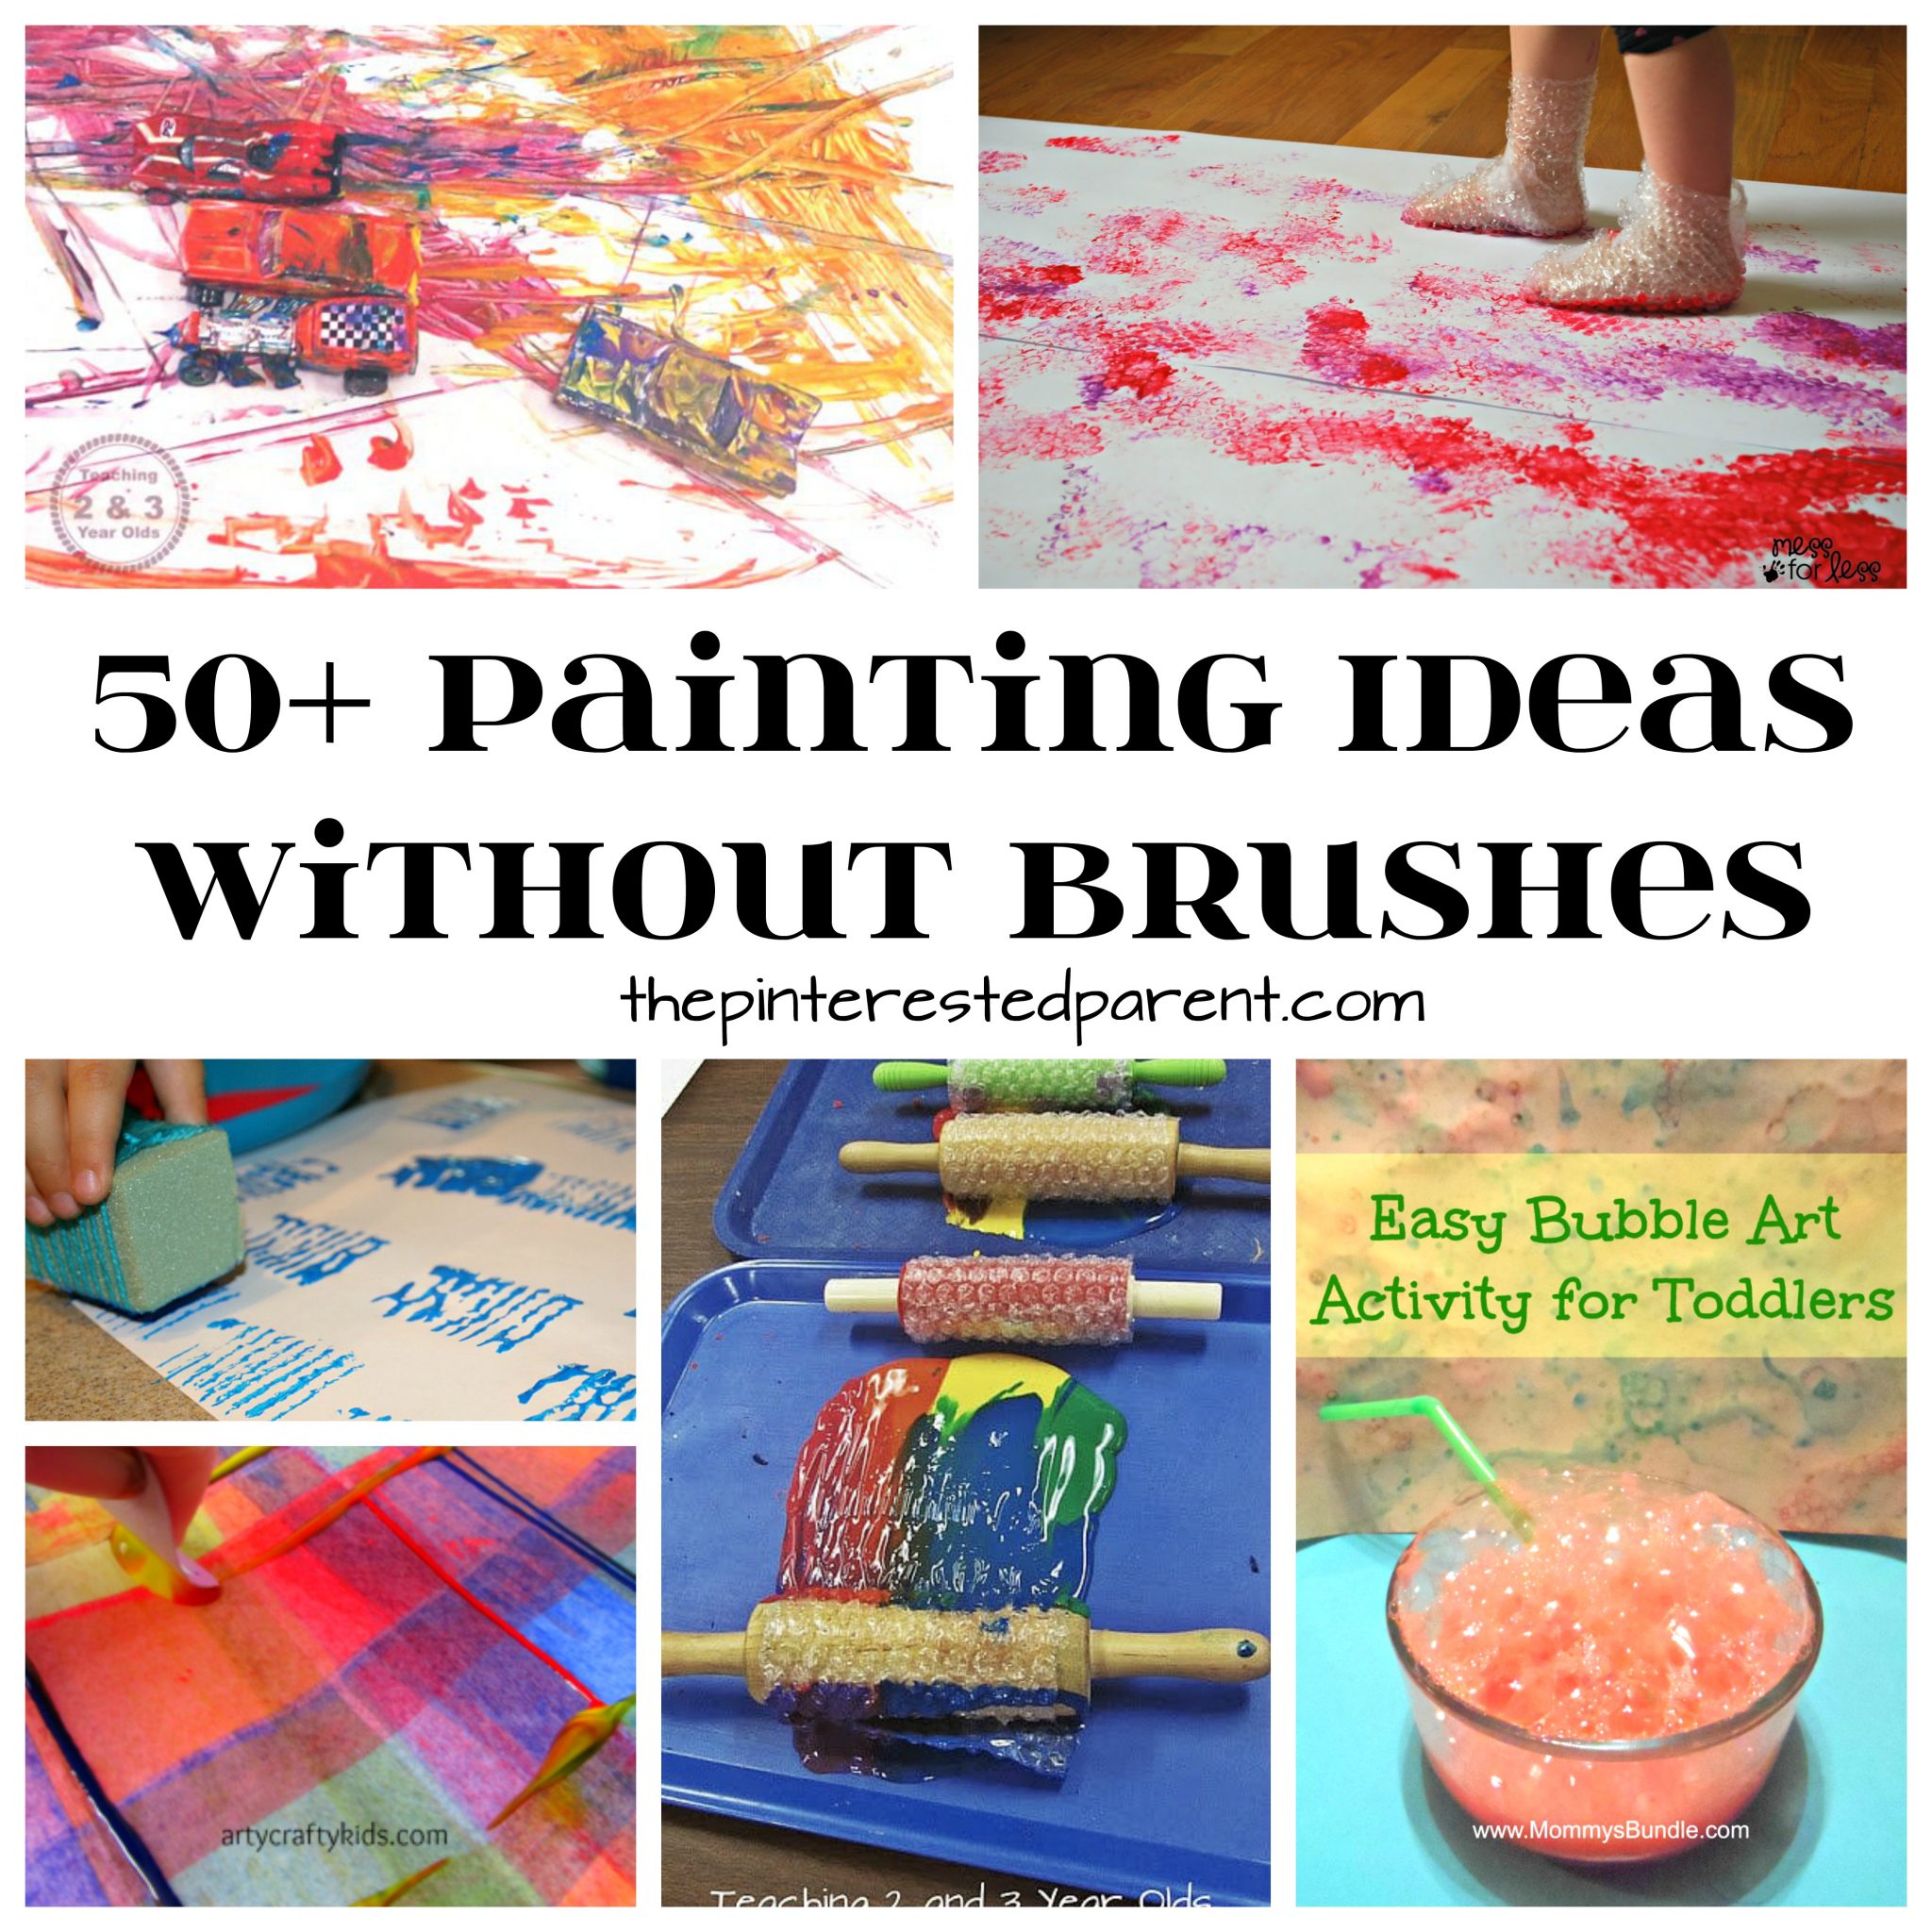 Over 50 painting without brushes technique ideas for kids. Fun process art projects for toddlers, preschoolers and kids